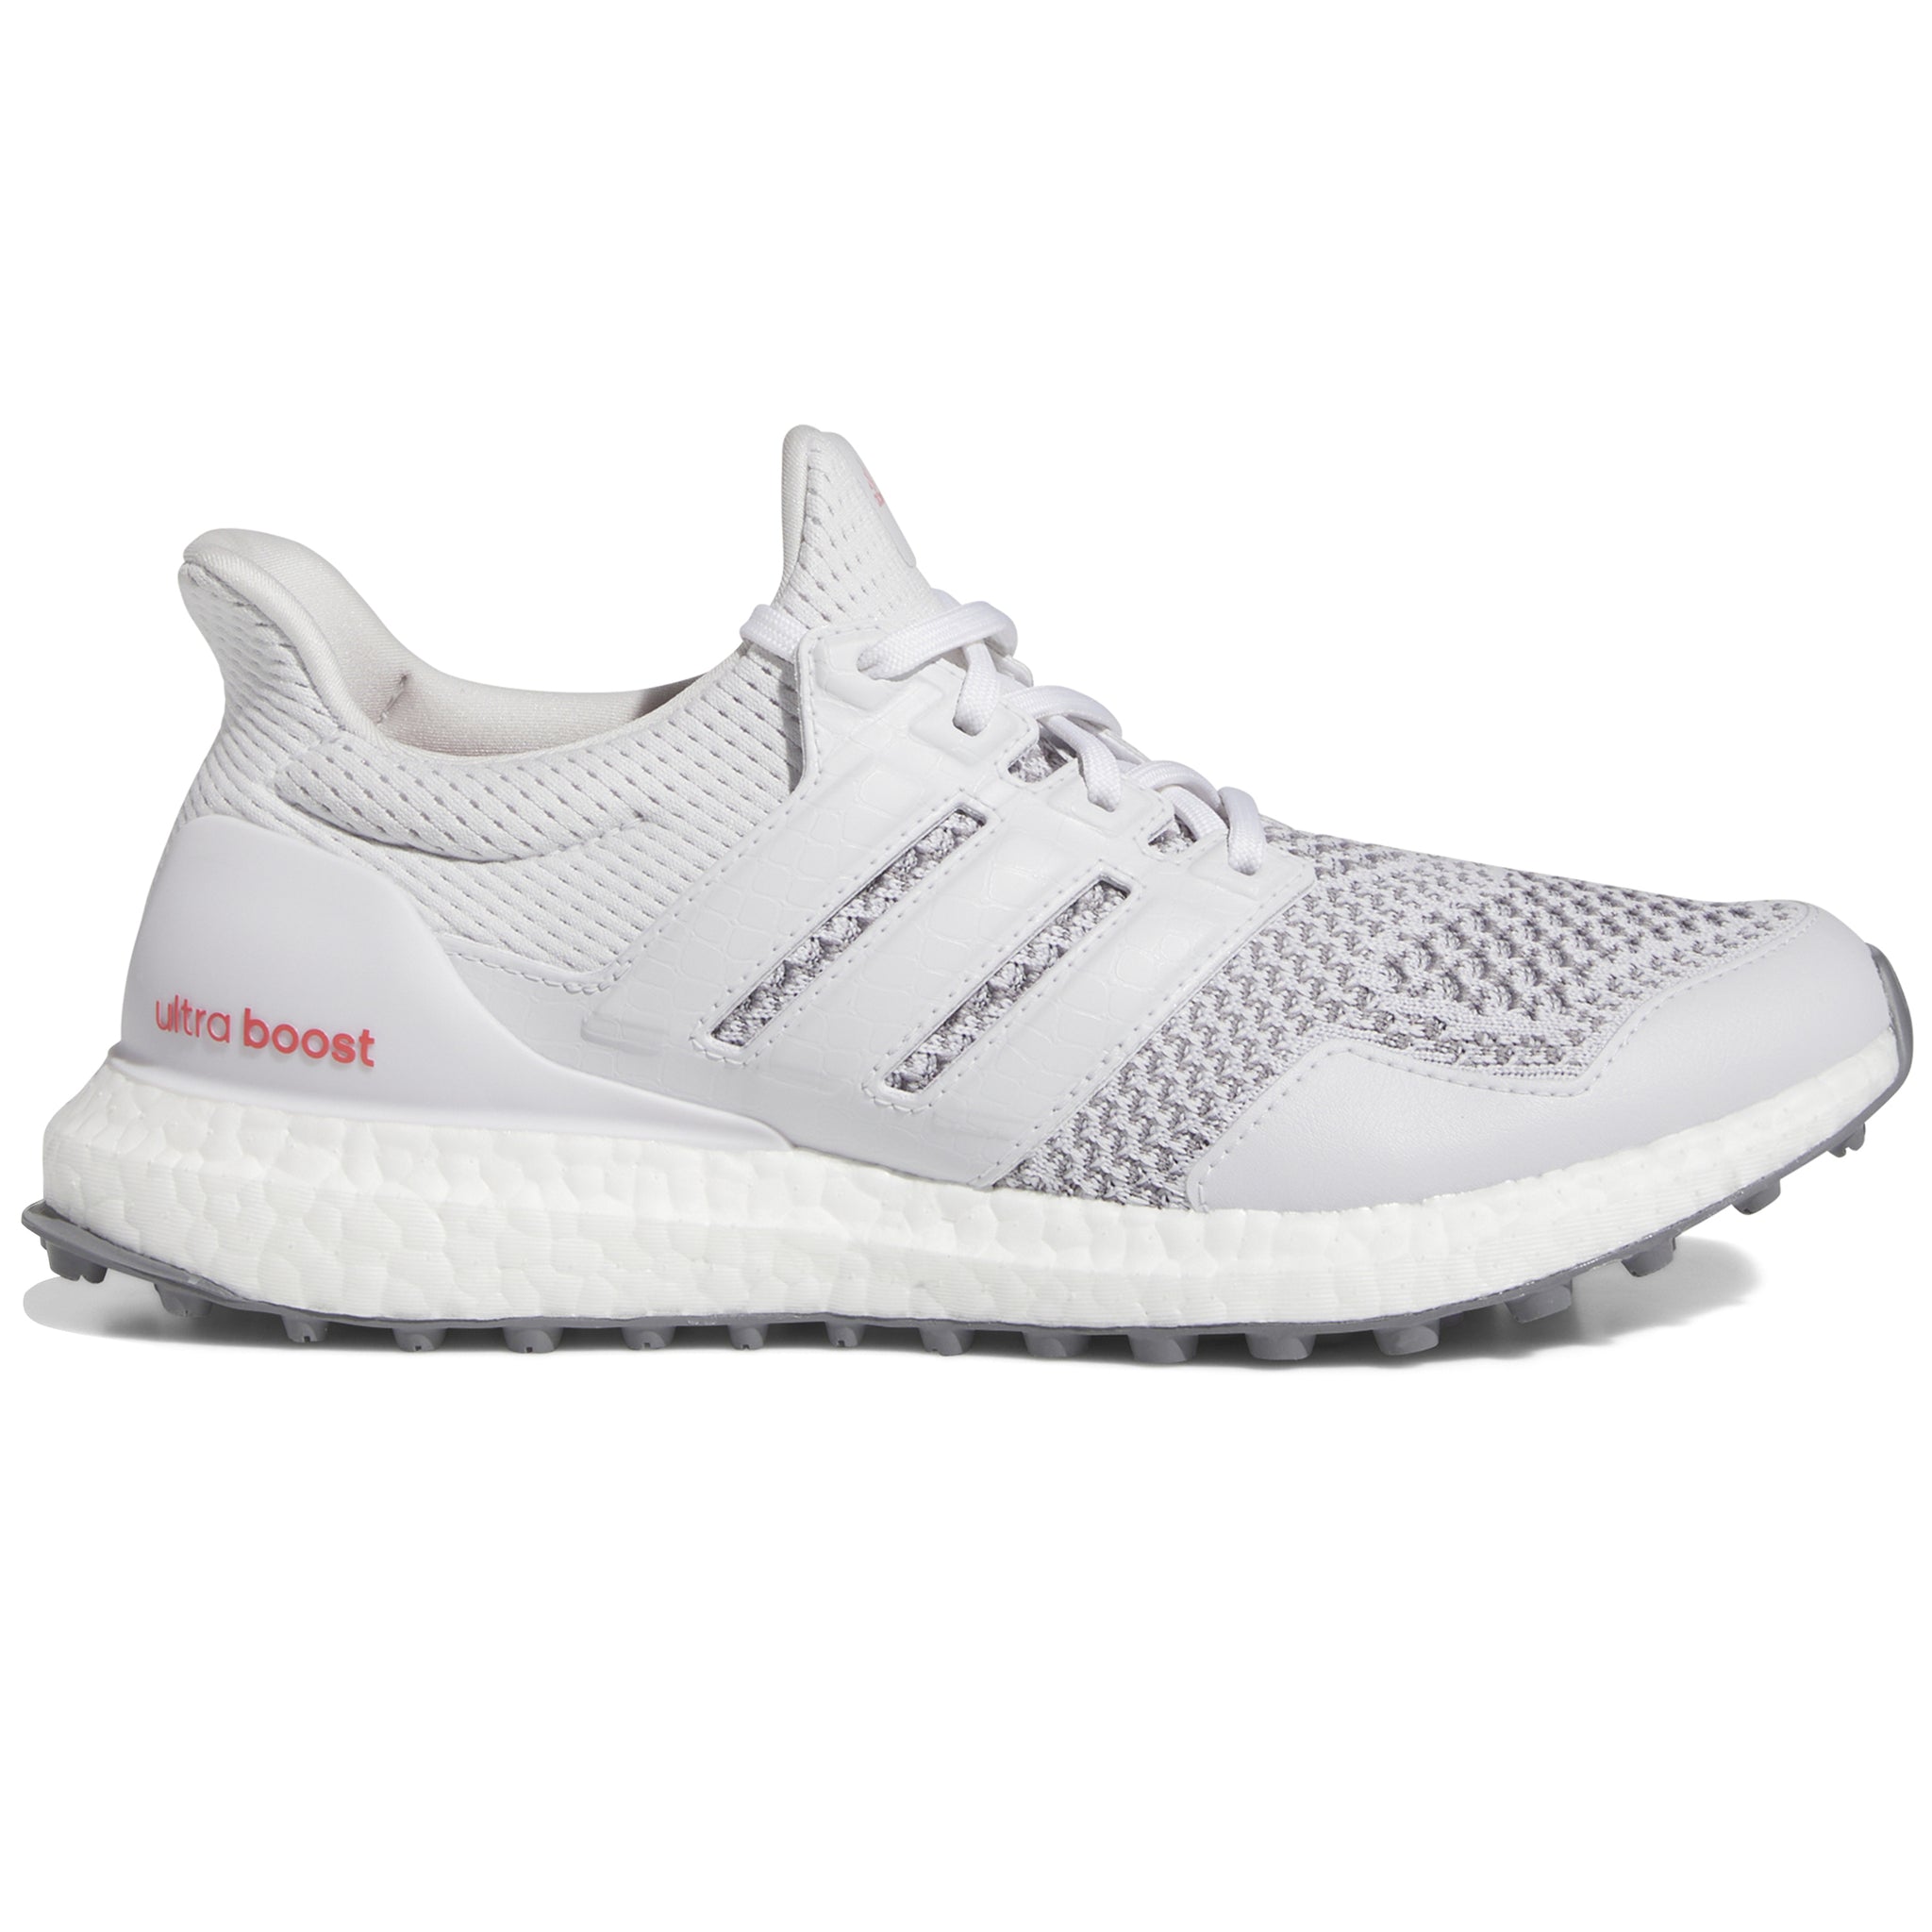 adidas-ultraboost-golf-shoes-if0323-dash-grey-white-preloved-ink